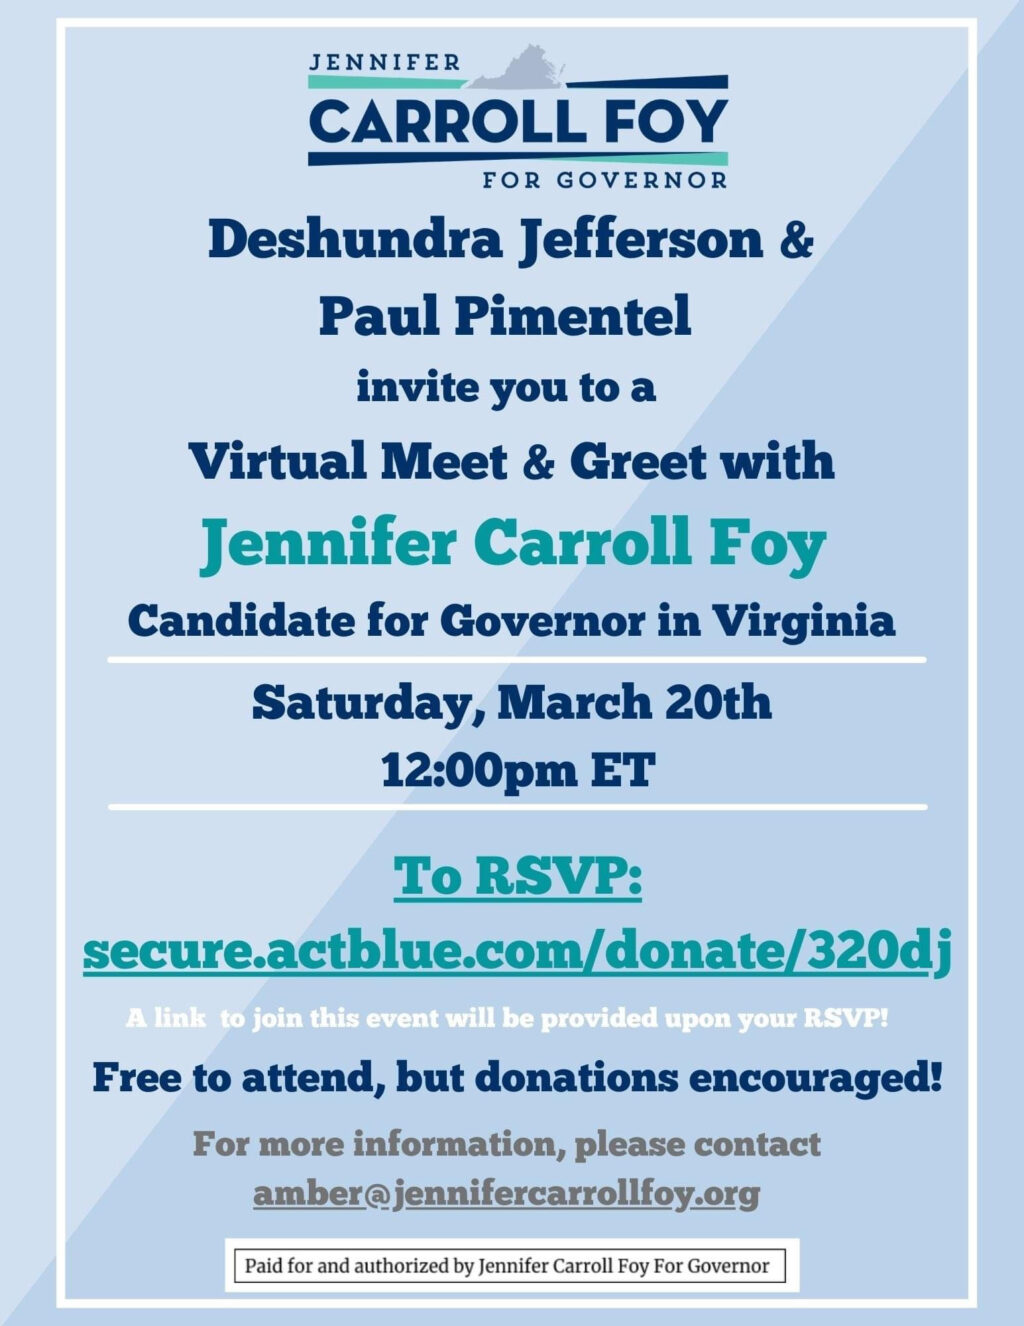 2021 Jennifer Carroll Foy Candidate for Governor in Virginia